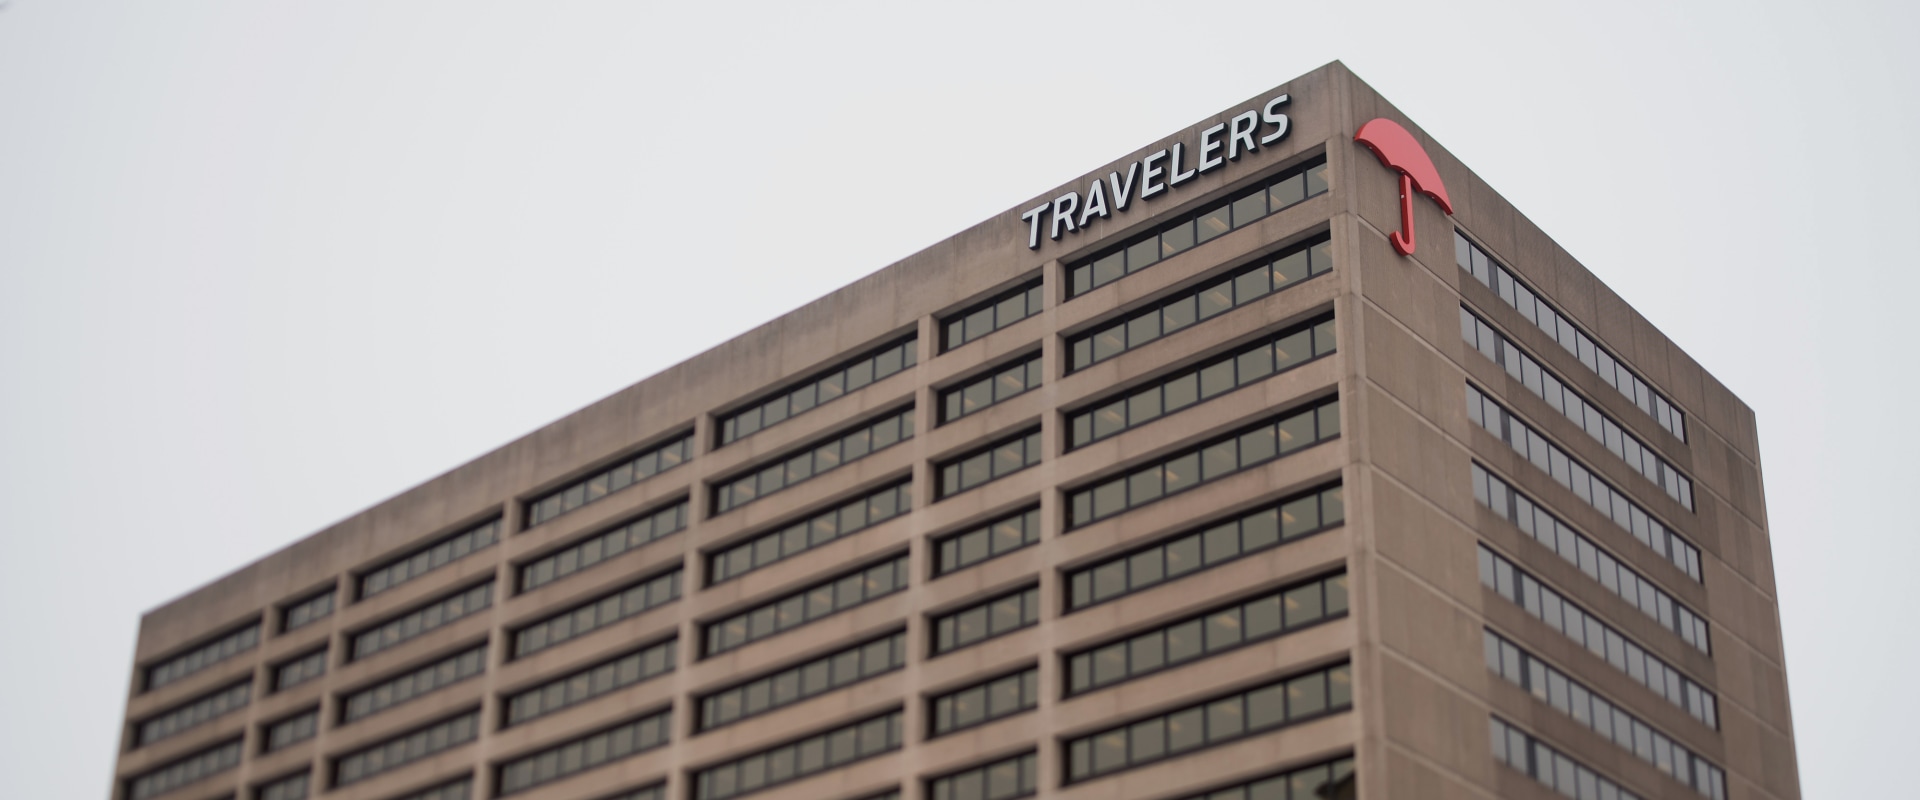 The Mergers and Acquisitions of The Travelers Companies